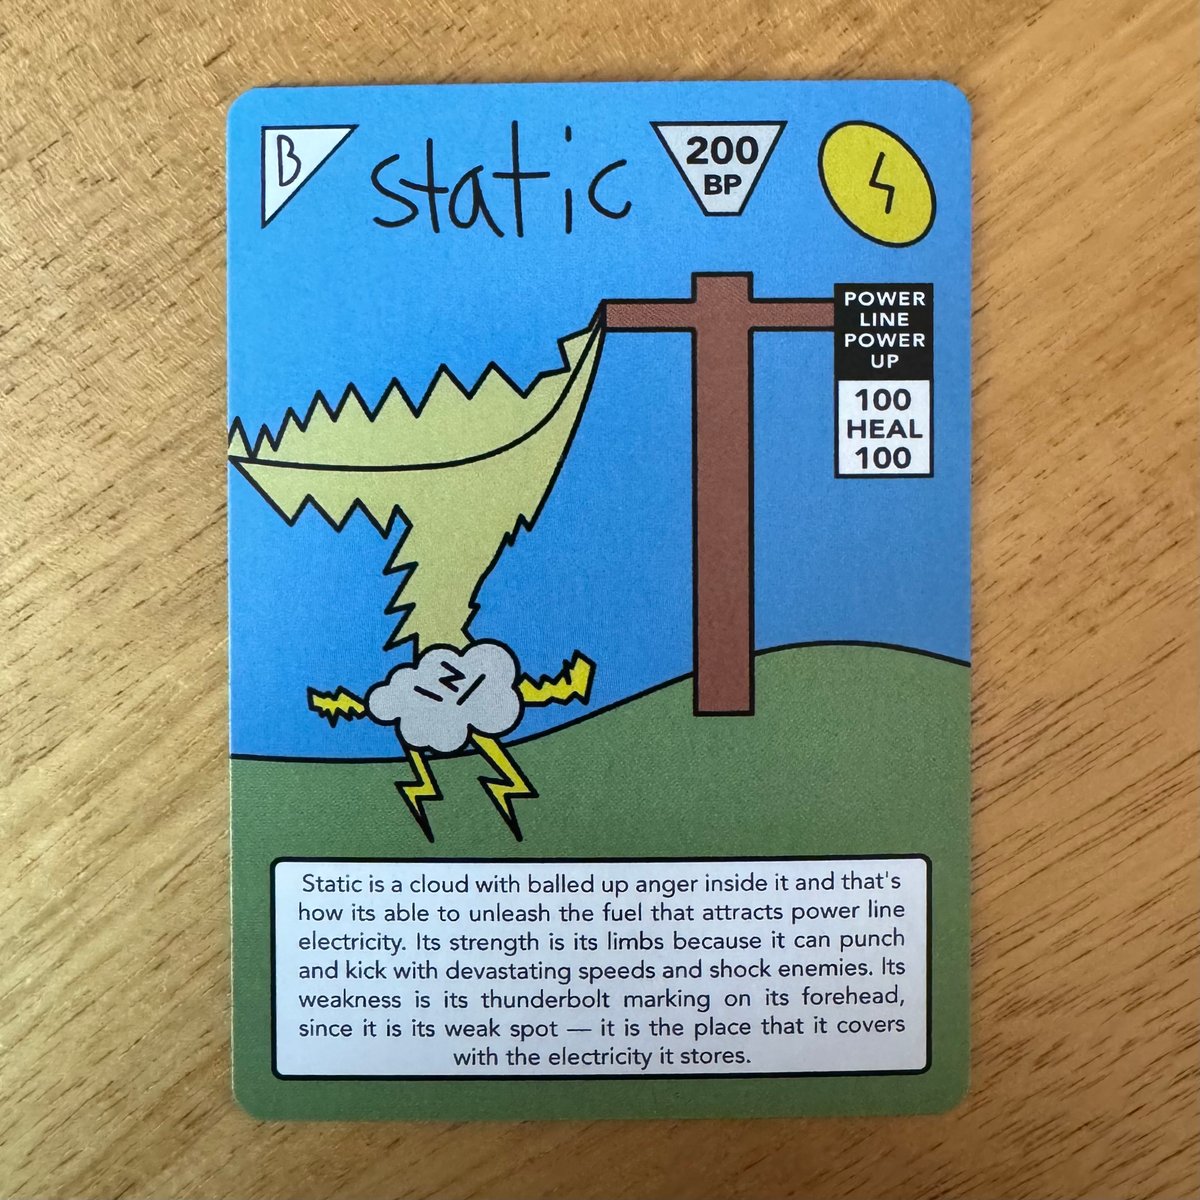 Image of Rukko - Trading Cards Designed by a 9 Year Old